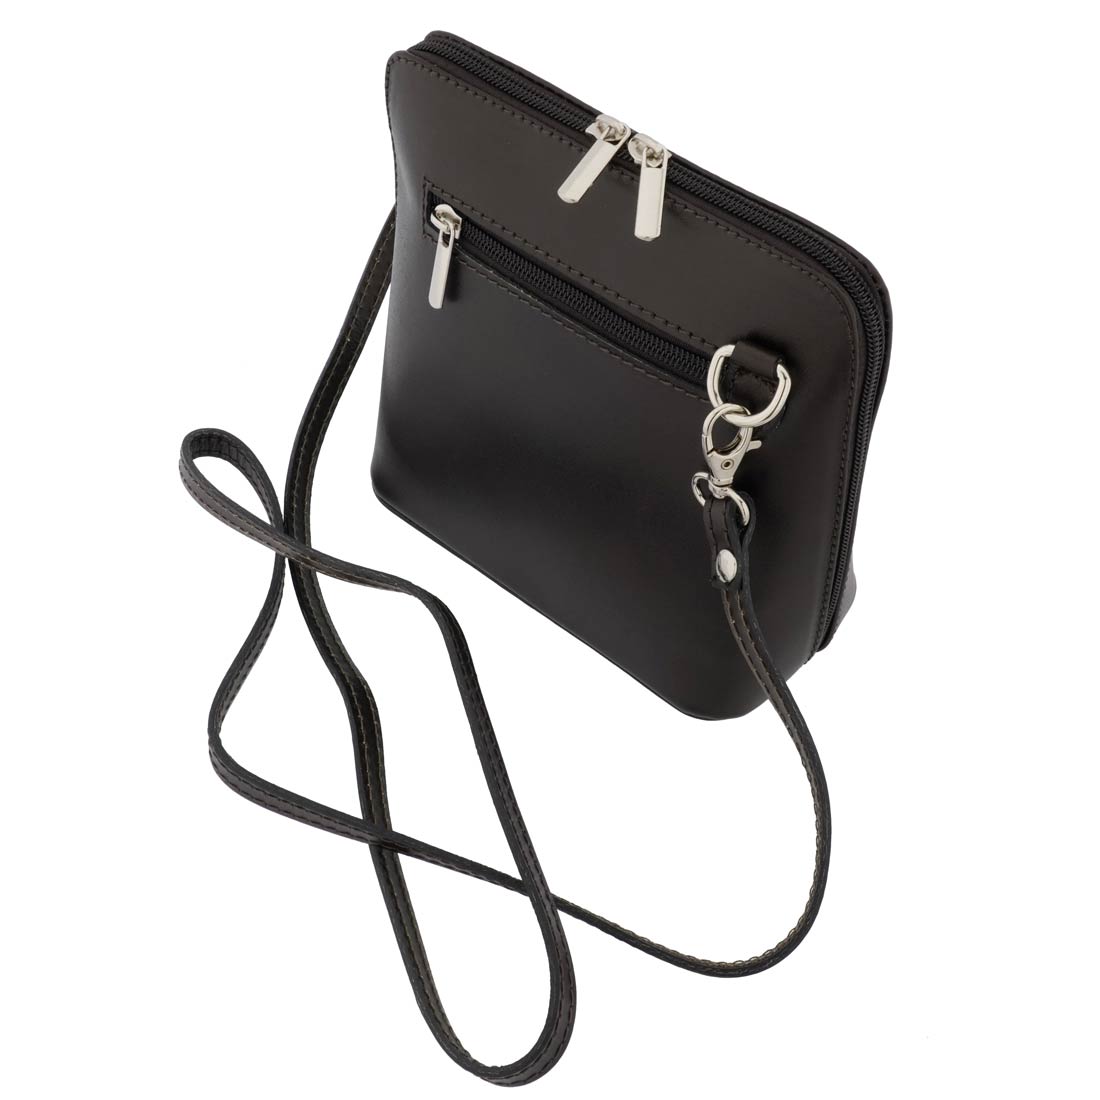 Leather Crossbody Bag Purse With Zipper Small Shoulder Bag 